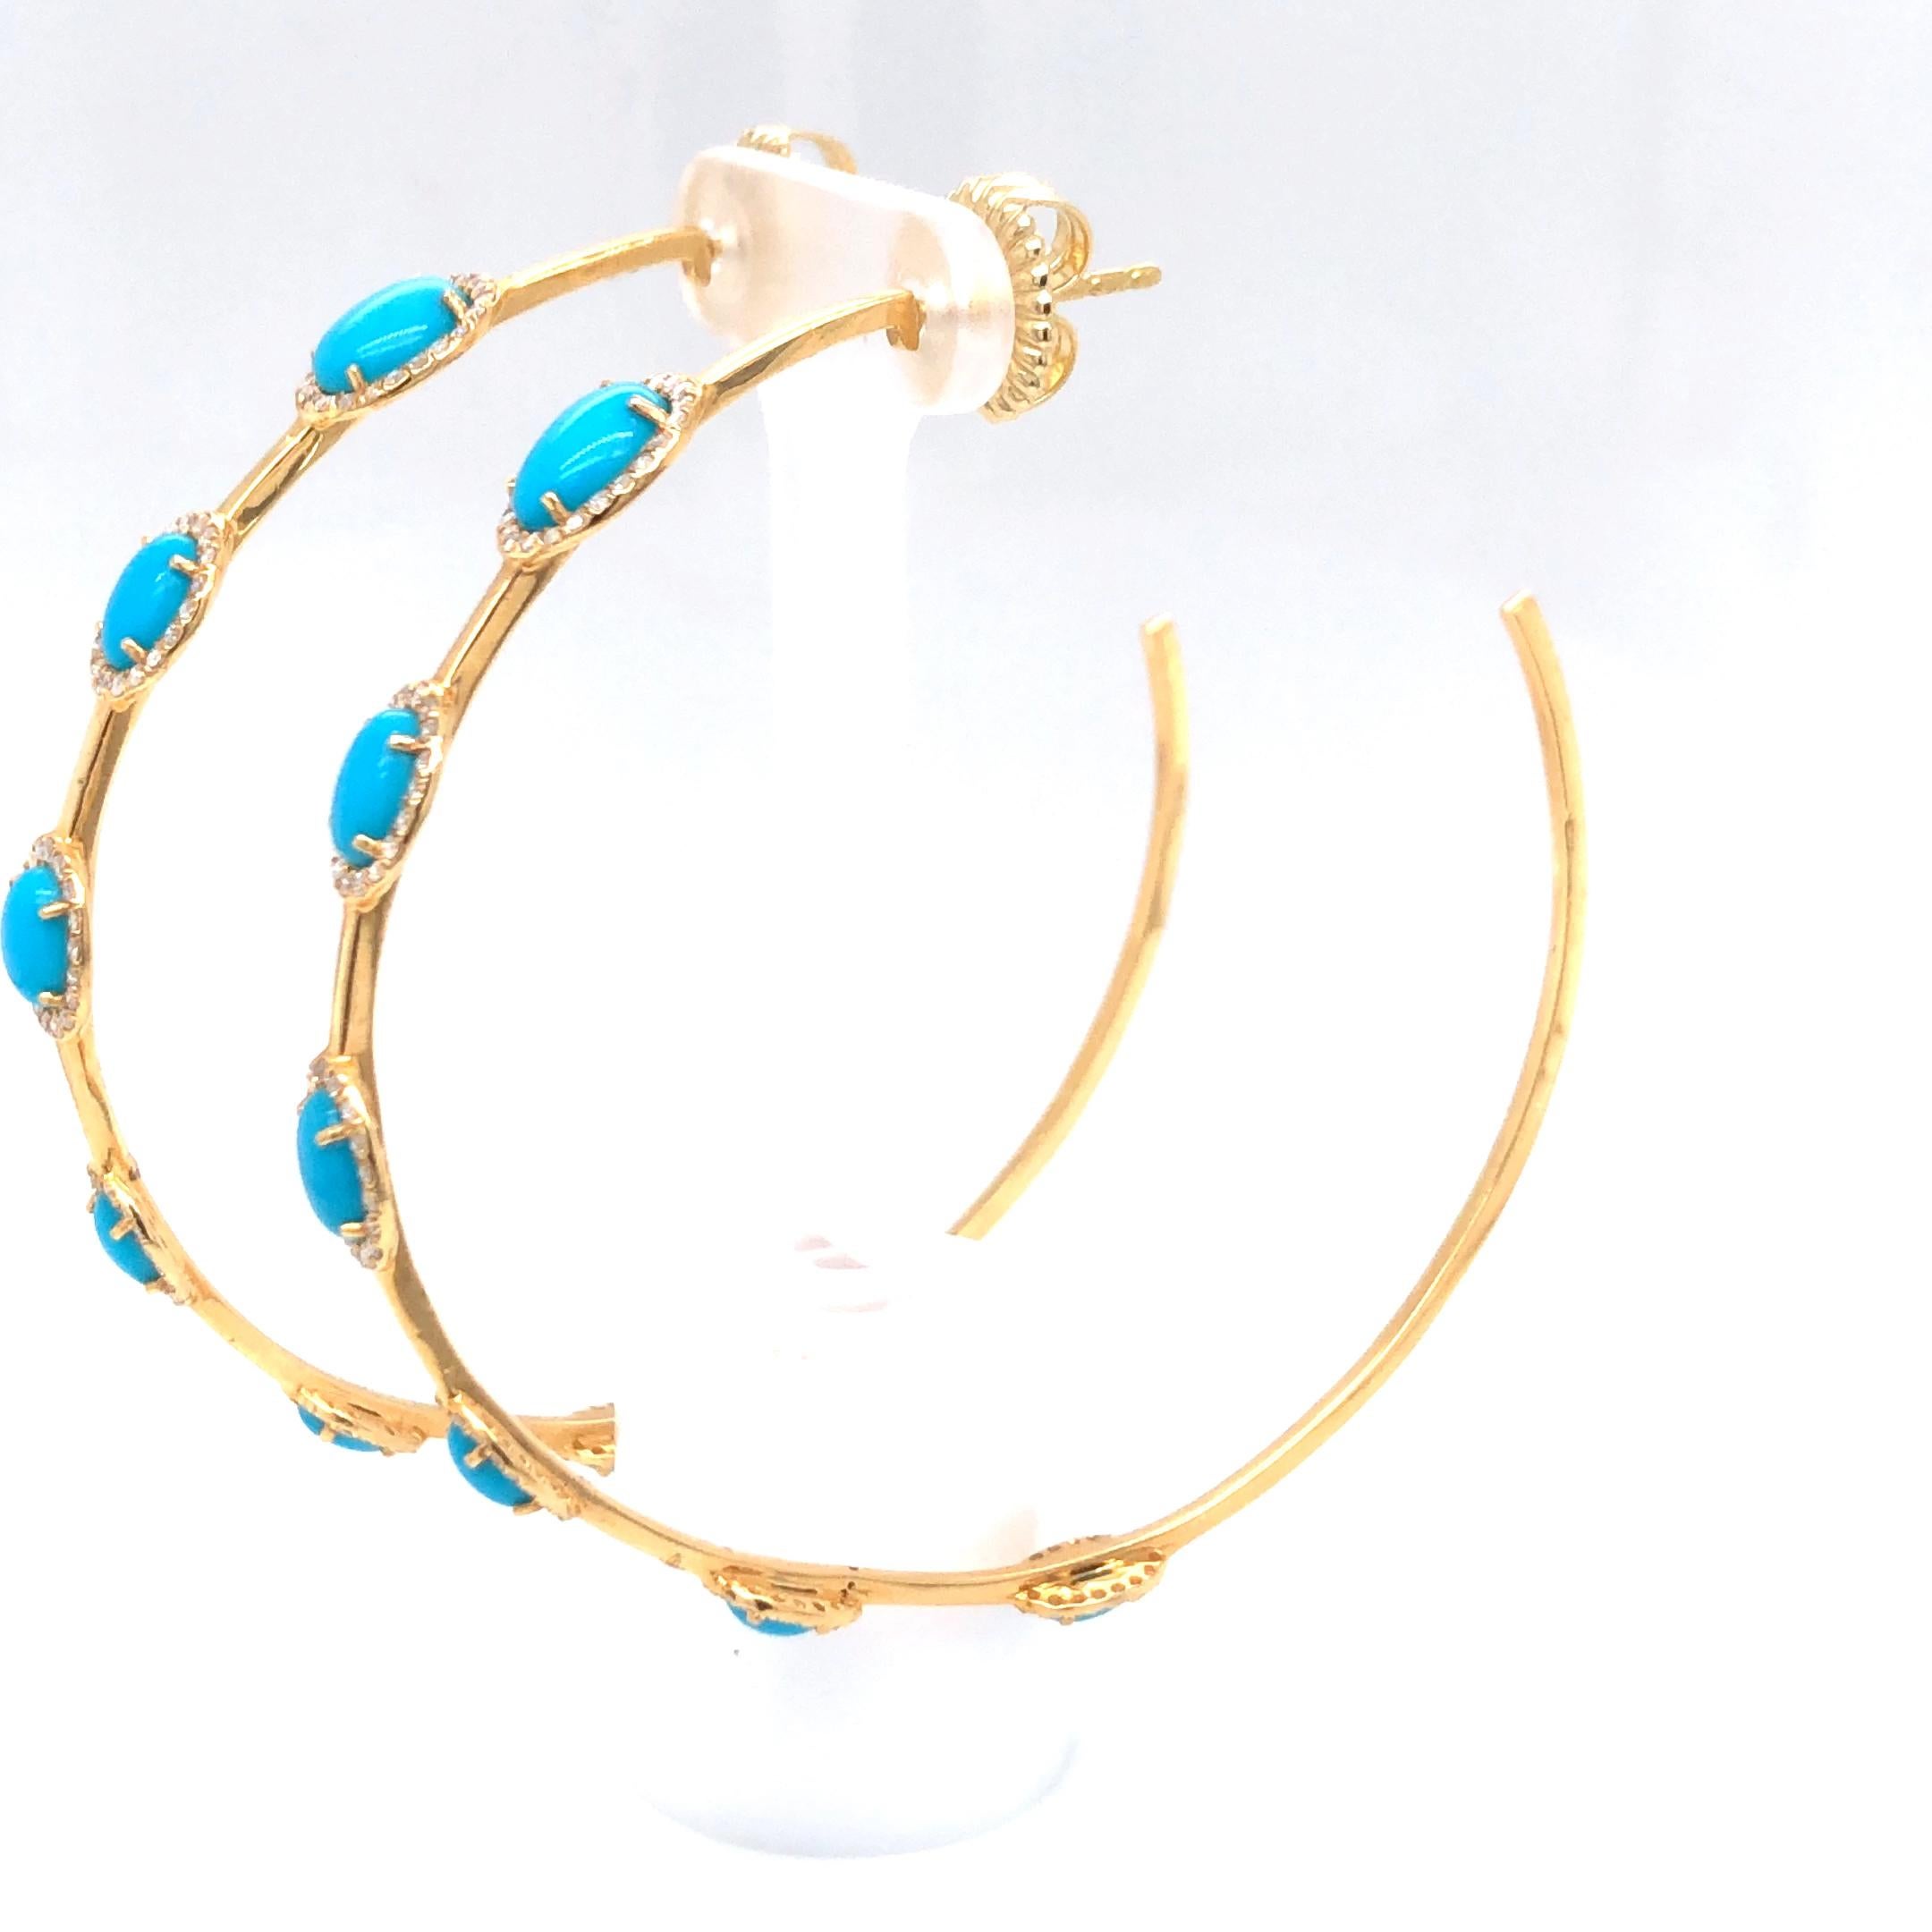 Turquoise 3.89ct and Diamond 0.84 Hoops 18K Yellow Gold